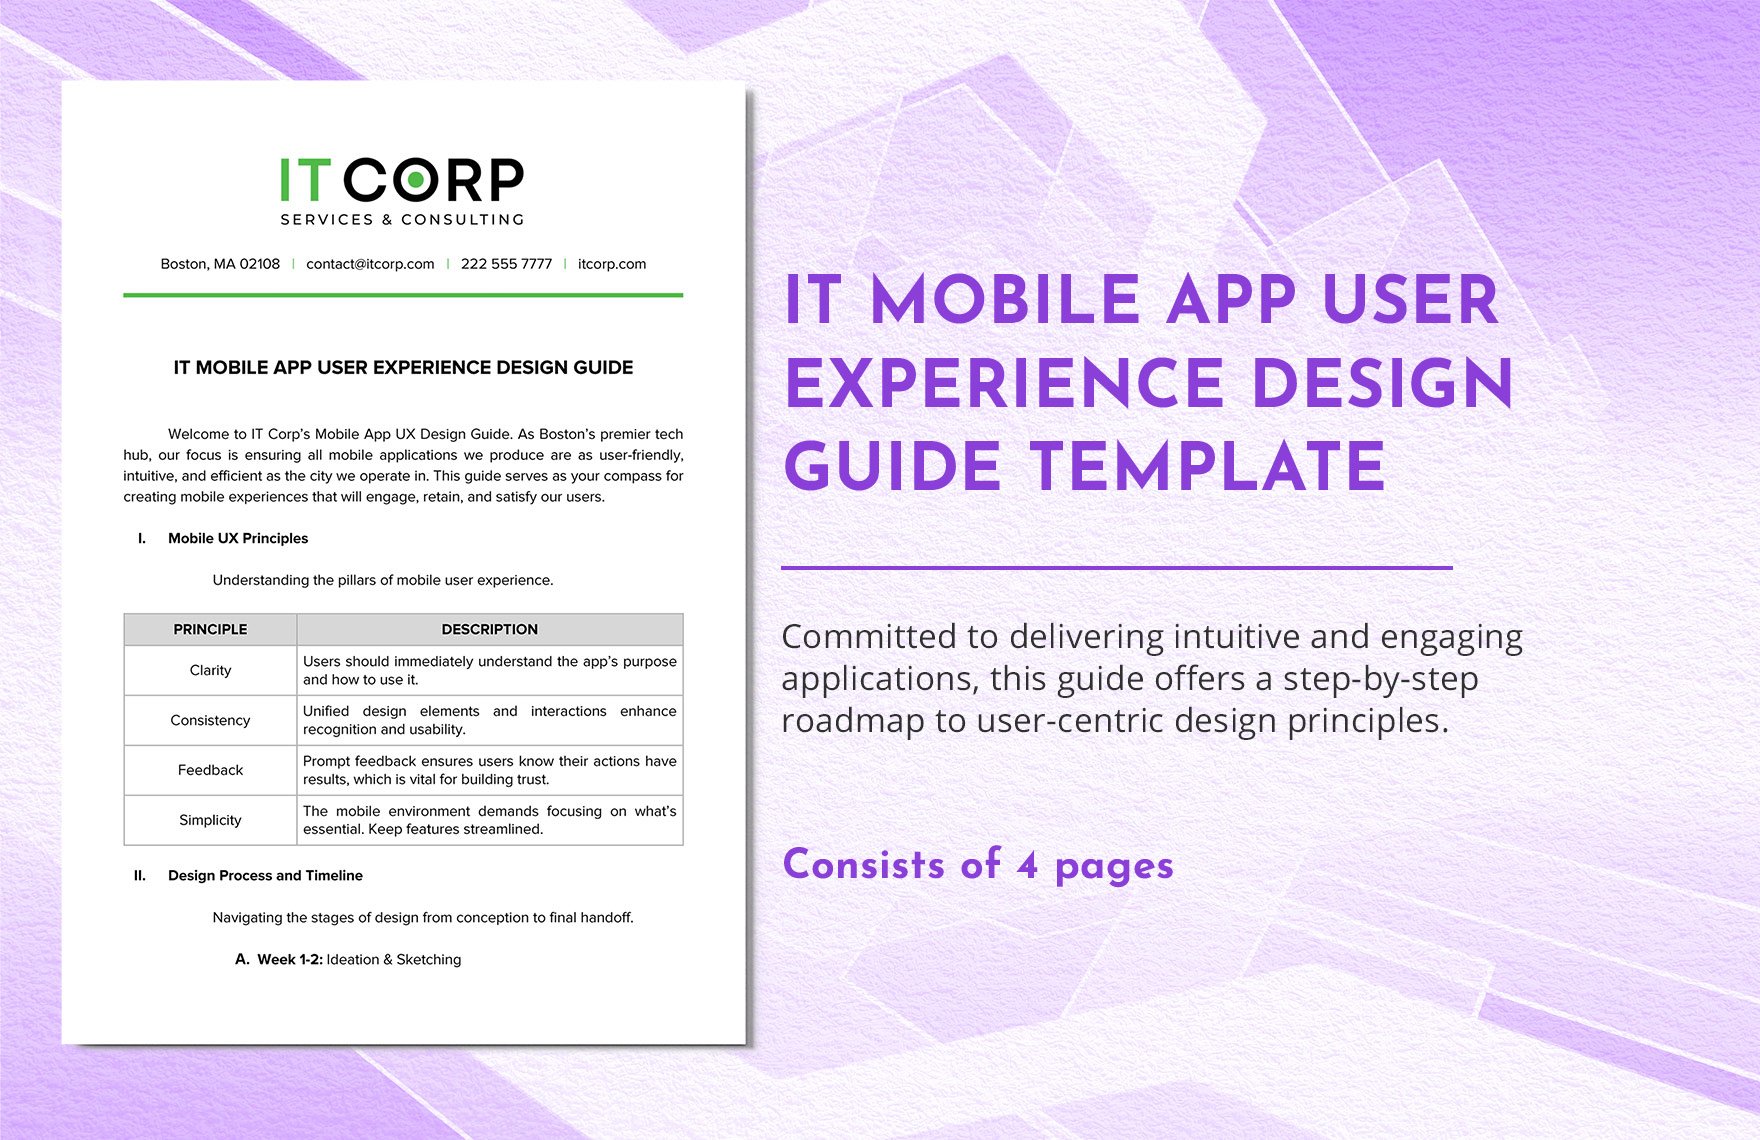 IT Mobile App User Experience Design Guide Template